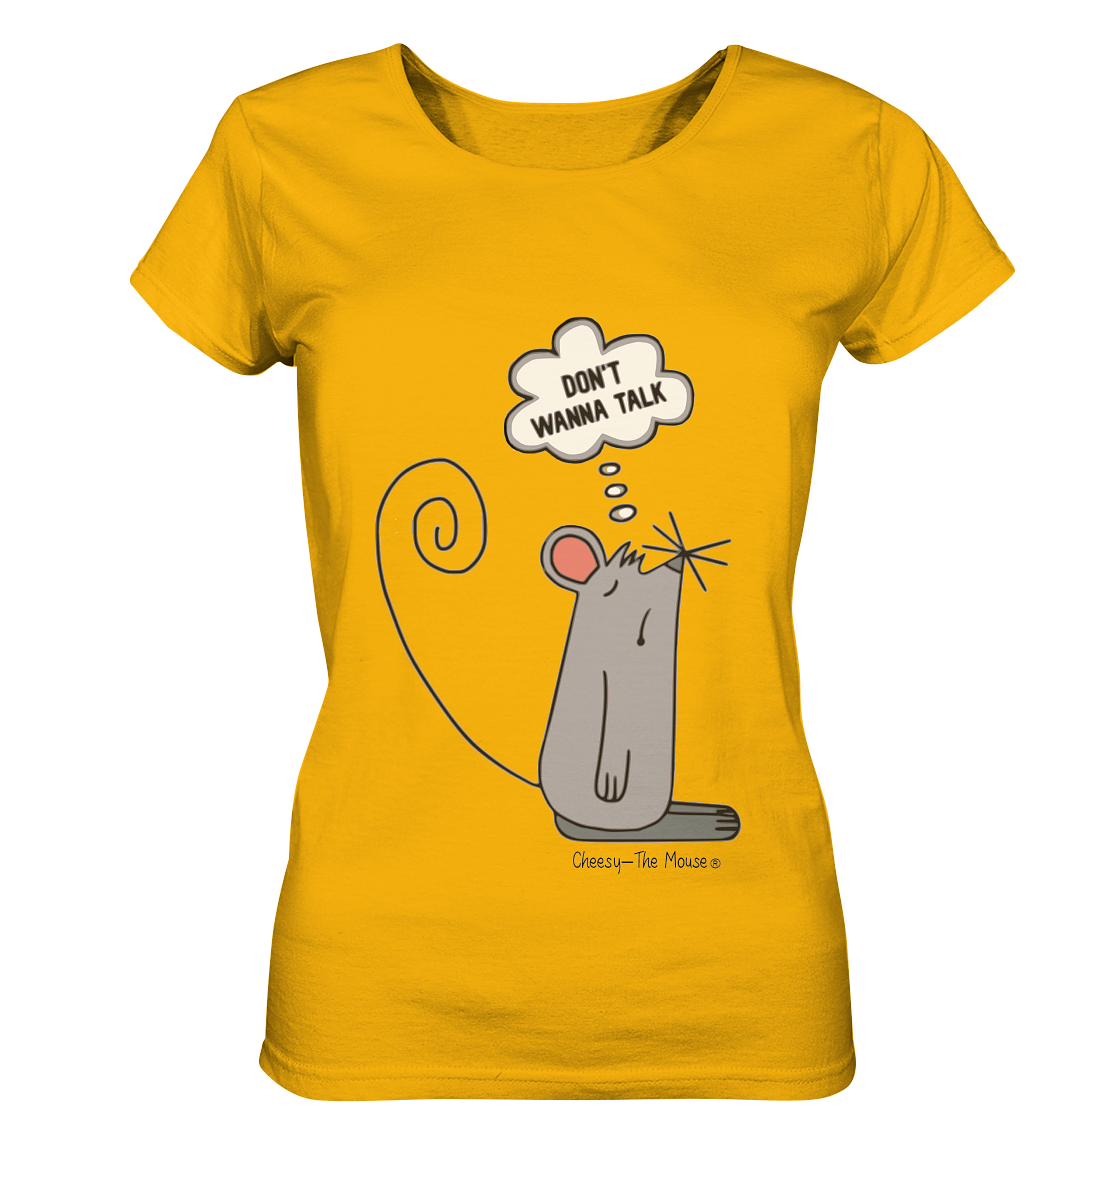 Cheesy The Mouse - Ladies Organic Shirt